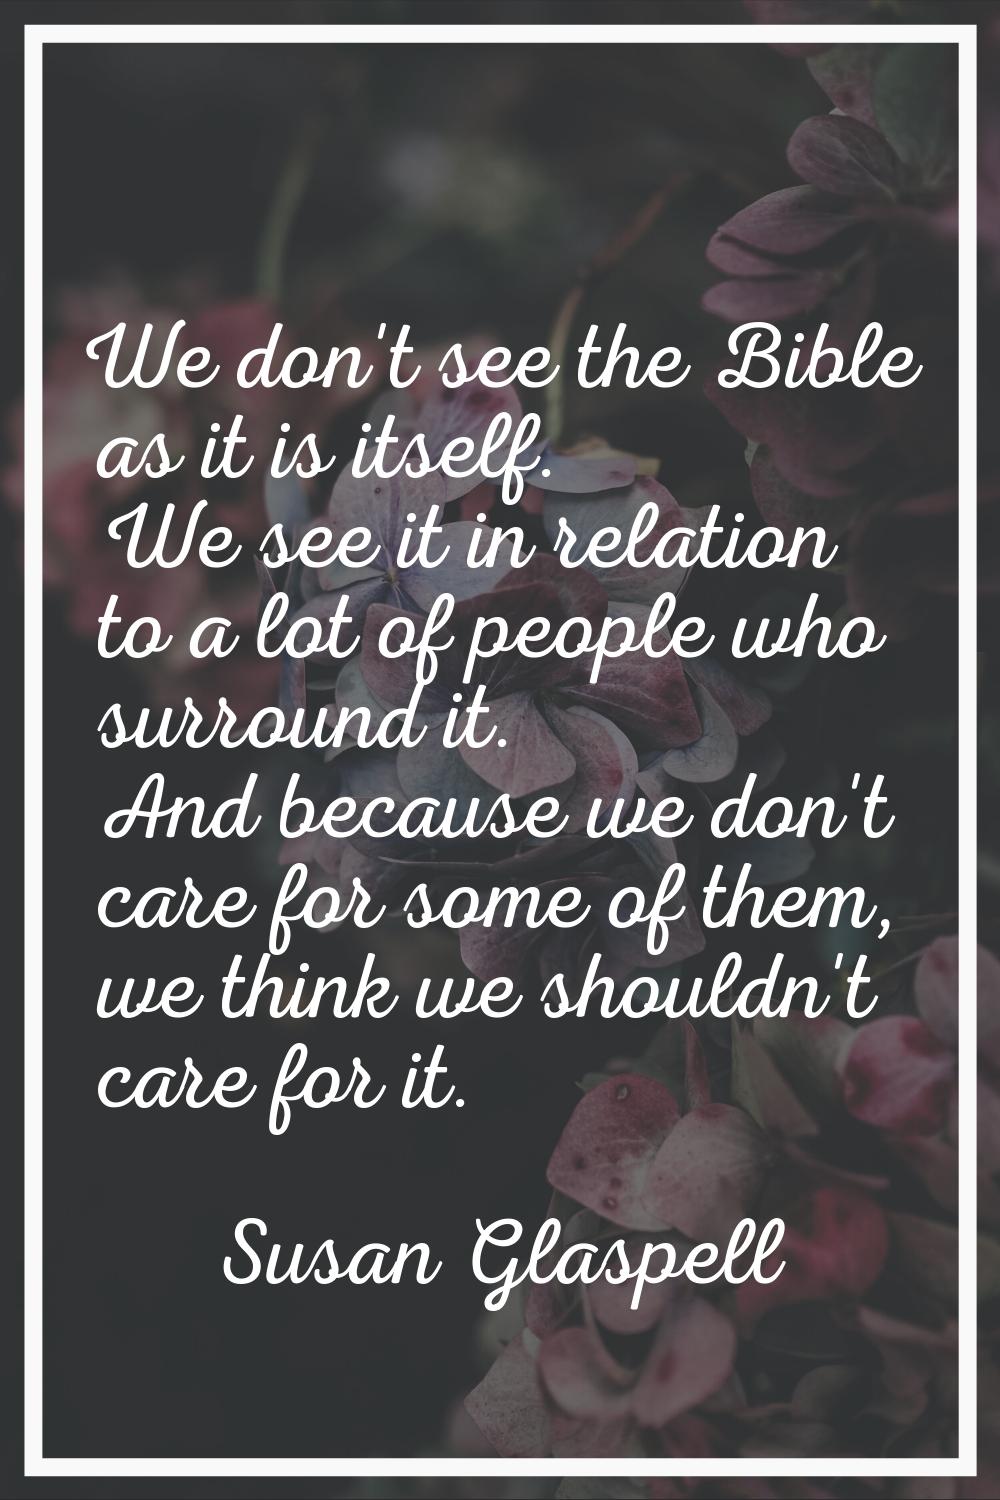 We don't see the Bible as it is itself. We see it in relation to a lot of people who surround it. A